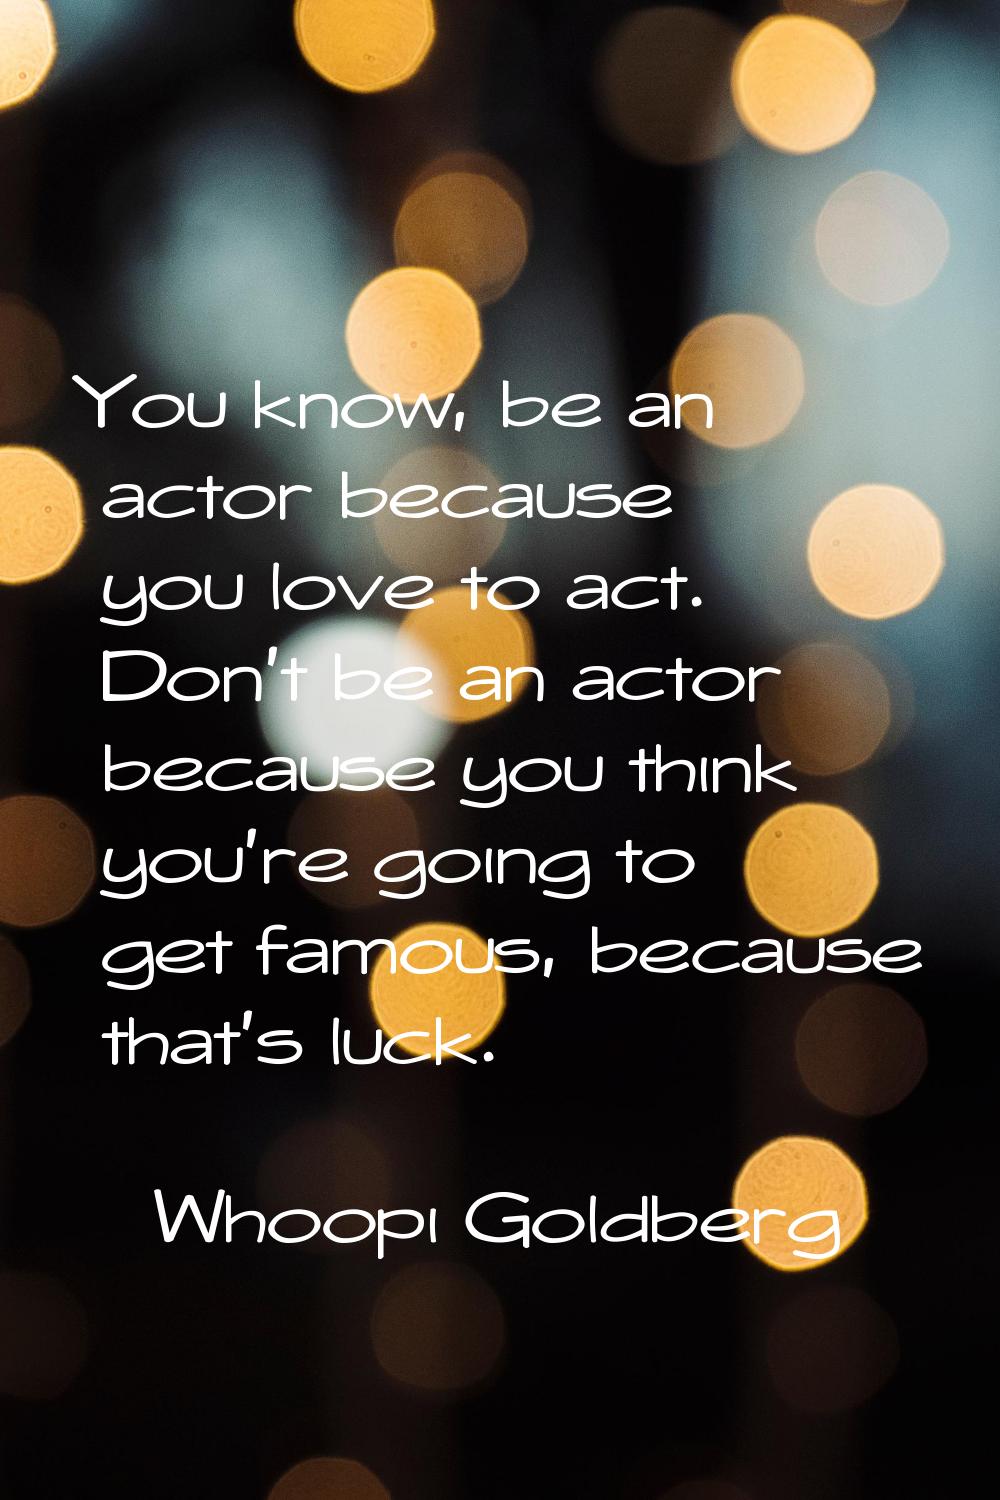 You know, be an actor because you love to act. Don't be an actor because you think you're going to 